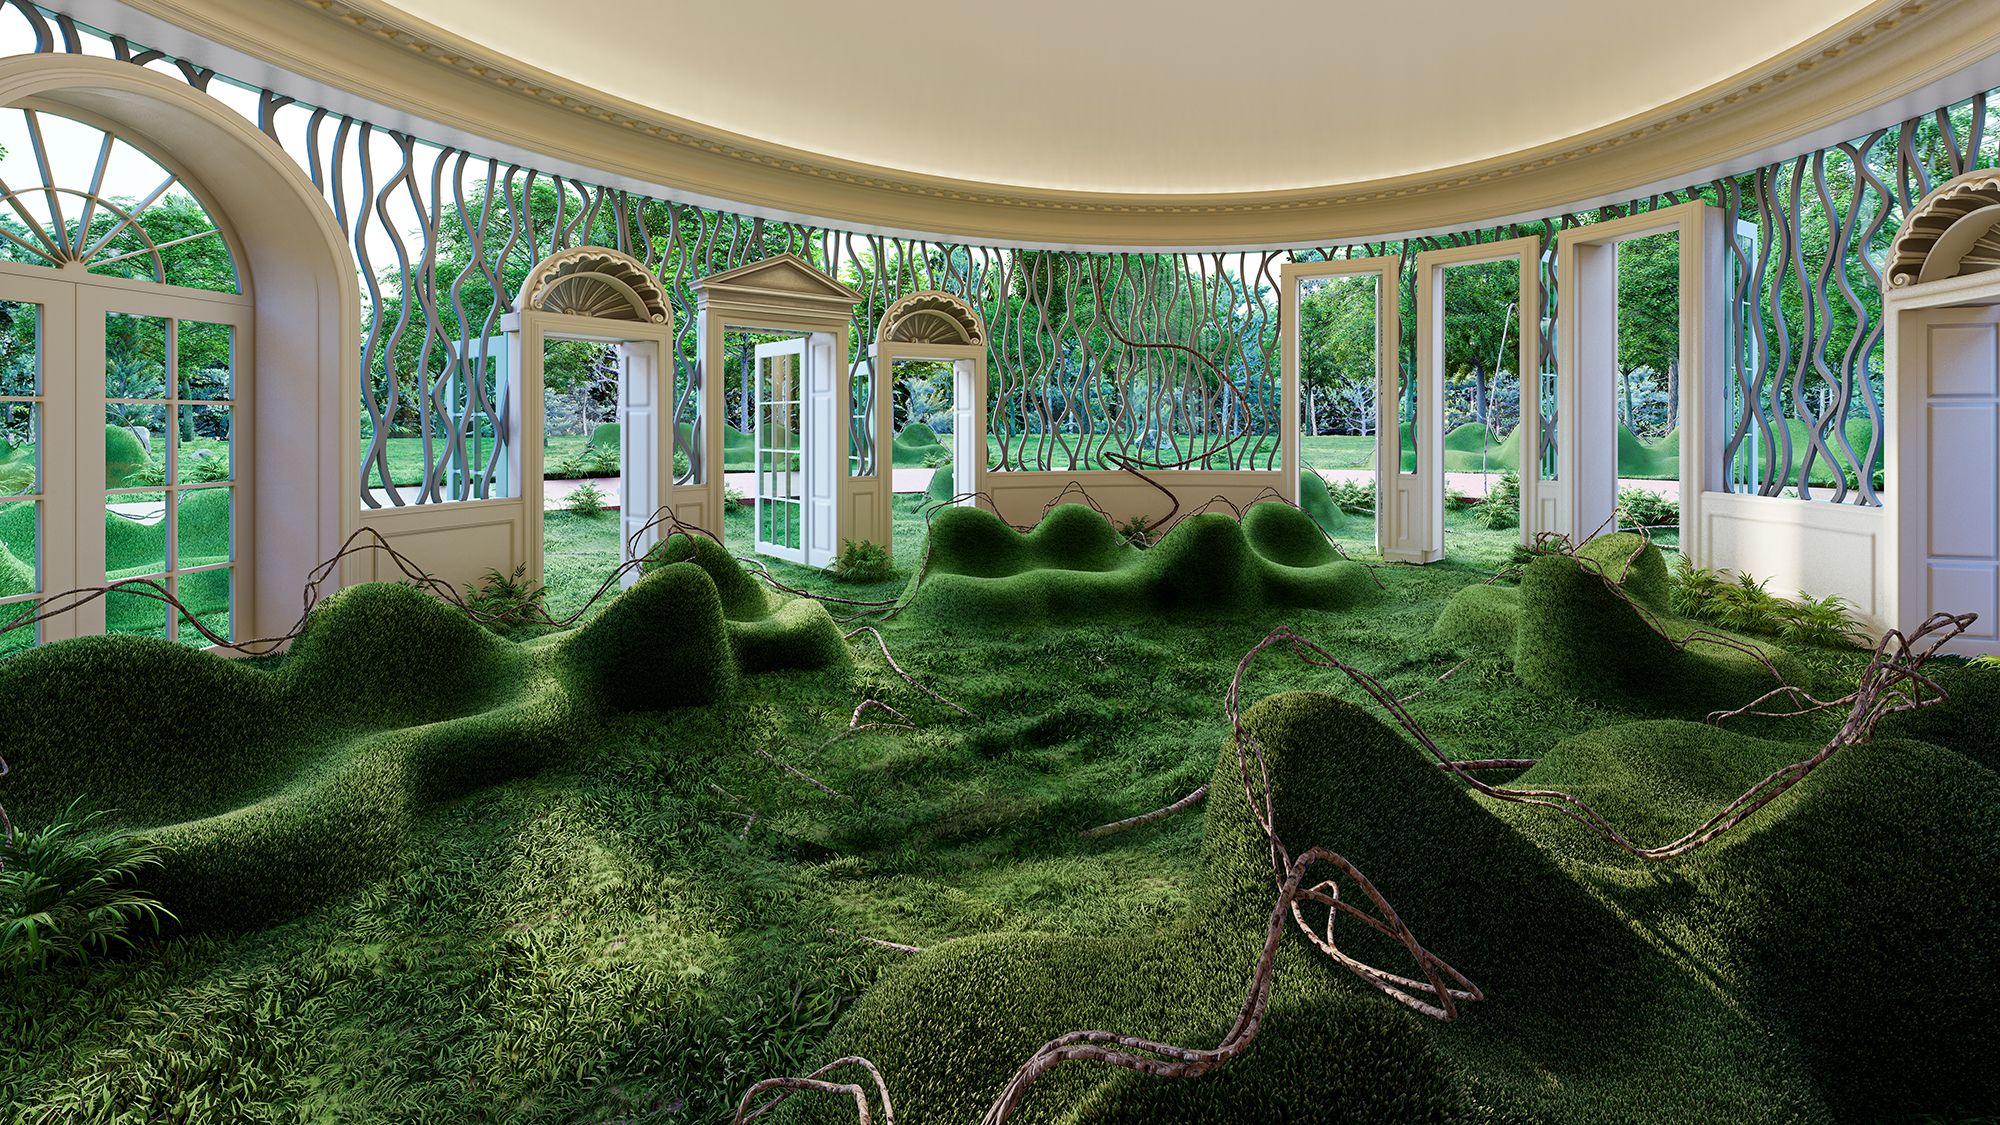 Image is a digital design of the Oval Office. There is a white ceiling, 8 doors all open and the walls are designed using thin metal piping manipulated into shapes, there are large gaps between each piping, where a view of the gardens outside are in view. The carpet is grass, and twigs and trees are growing from the outside in. The furniture is also grass and blends into the carpet. 